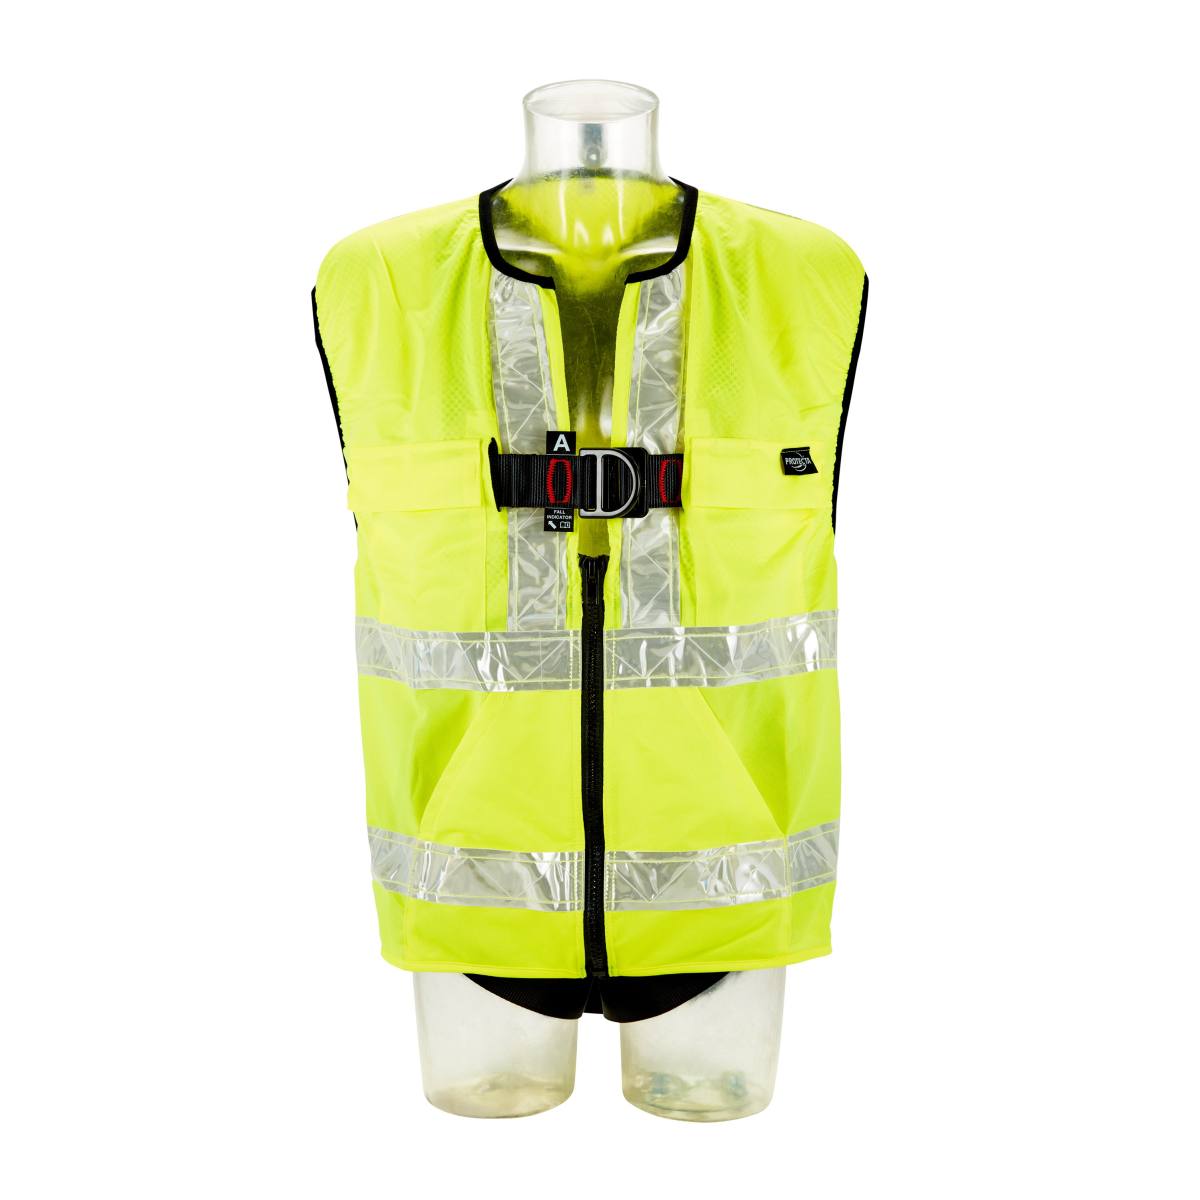 3M PROTECTA safety harness - chest and rear fall arrest eyelets neon yellow high-visibility vest standard VS chest and rear fall indicators belt end depot label protection with labeling field black coated fittings lanyard holder M/L